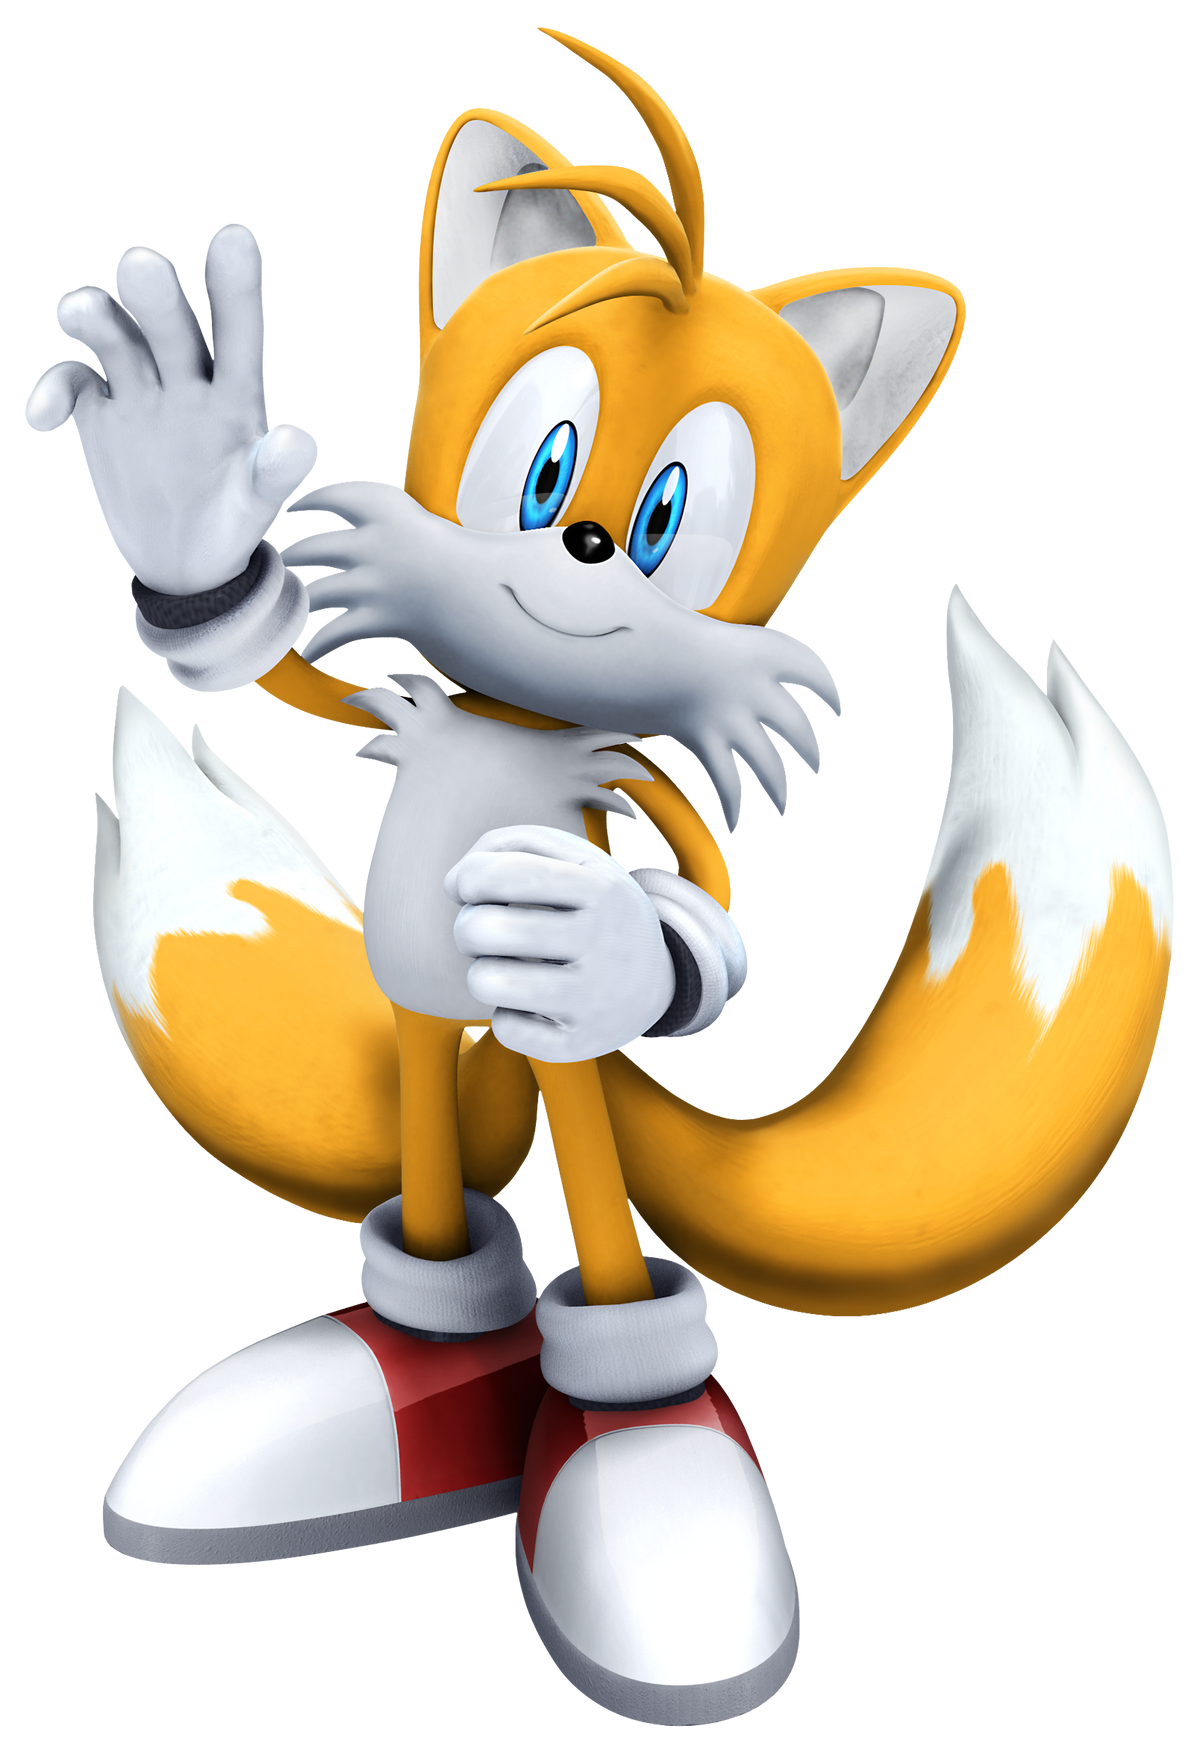 Fantasia Sonic / tails / knuckles